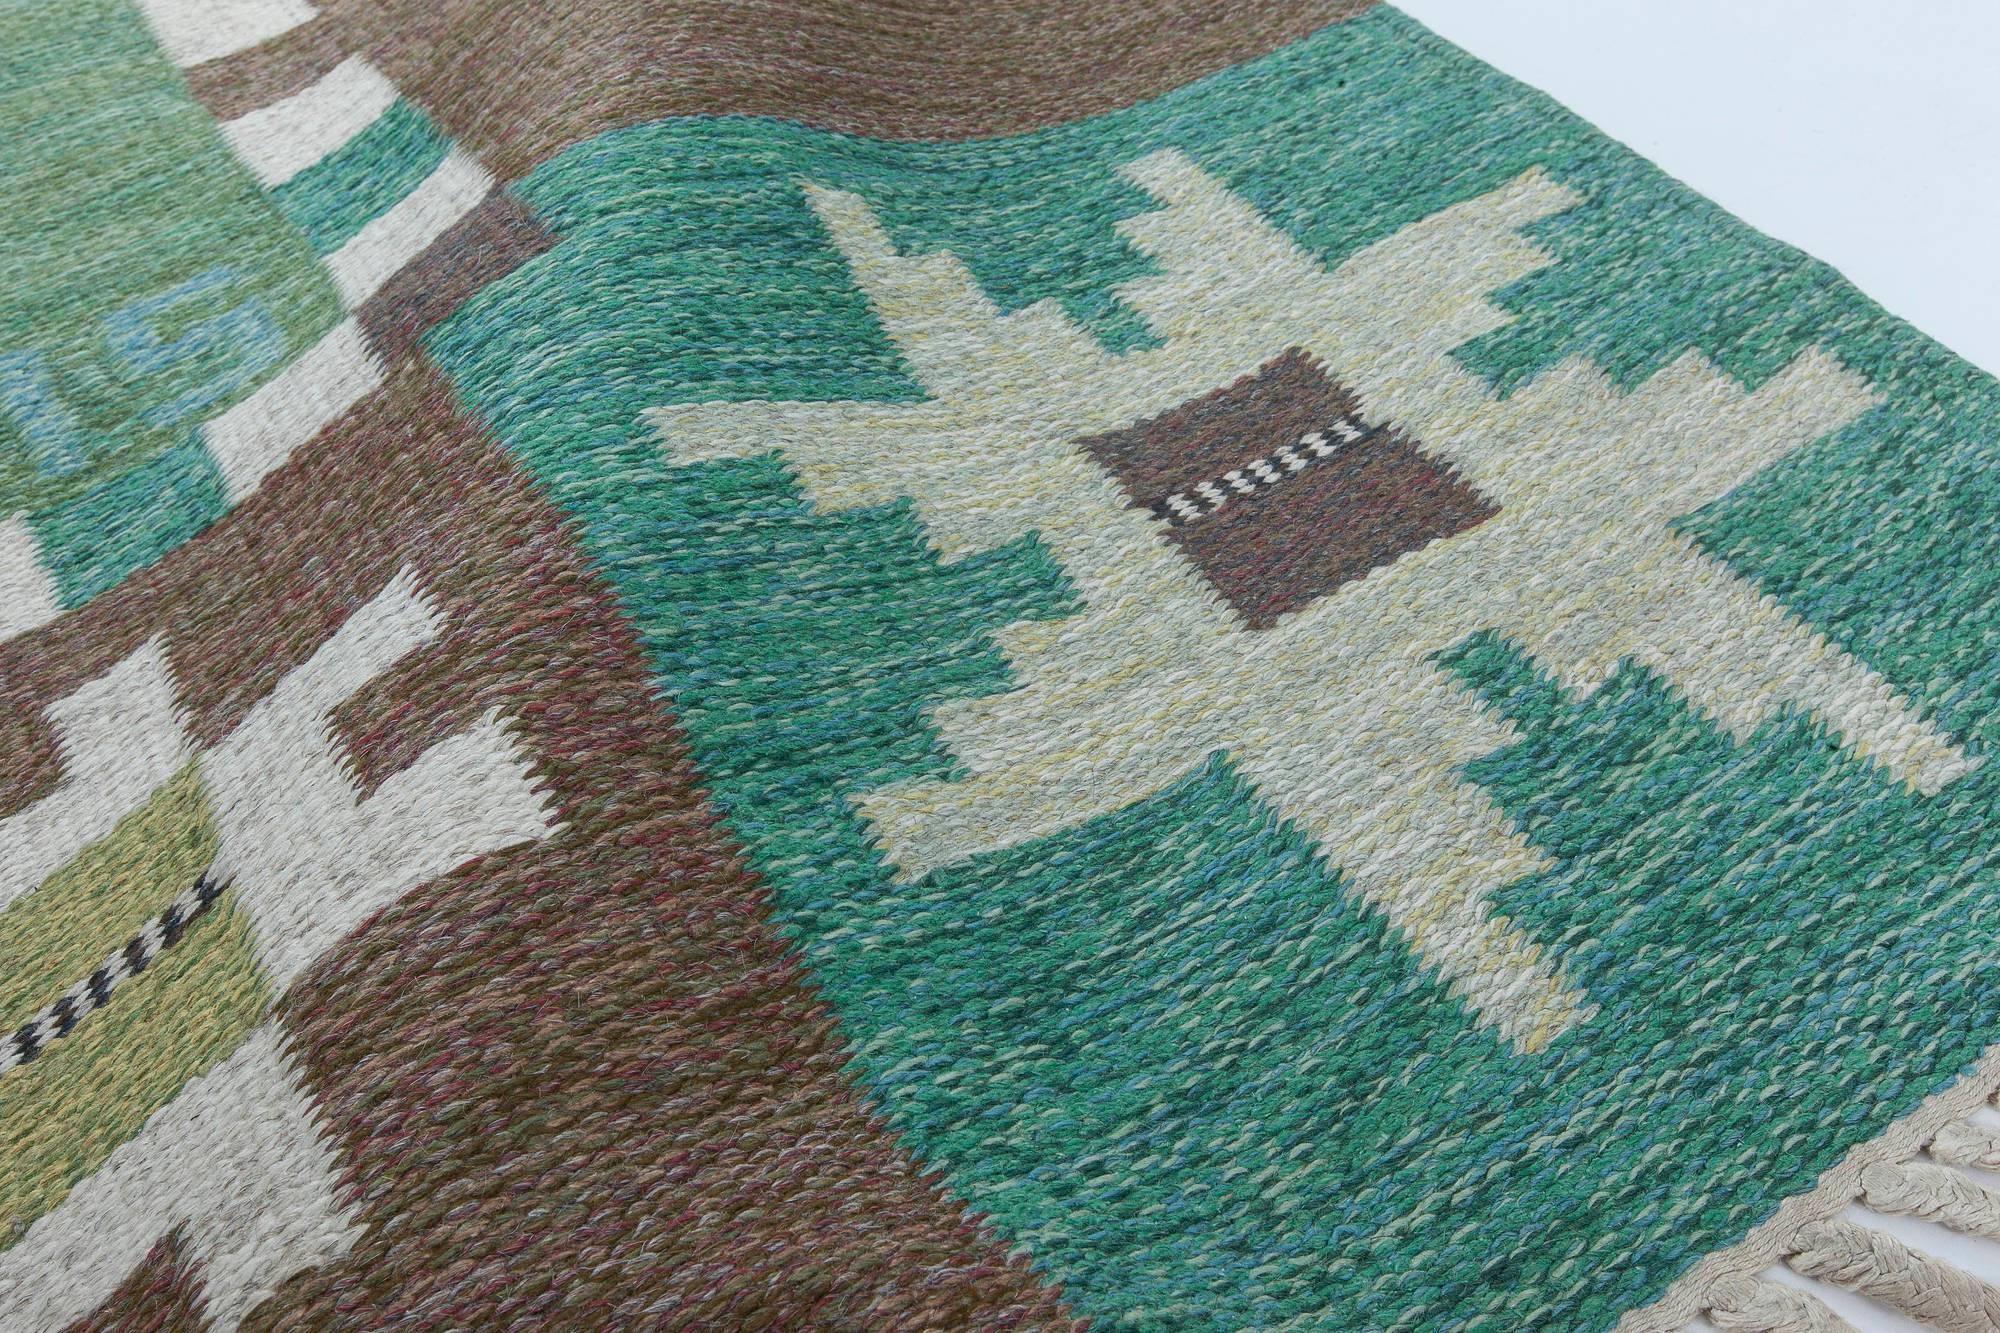 Hand-Knotted Mid-20th century Swedish Garden Design Green, Brown, Ivory Rug by Ingegerd Silow